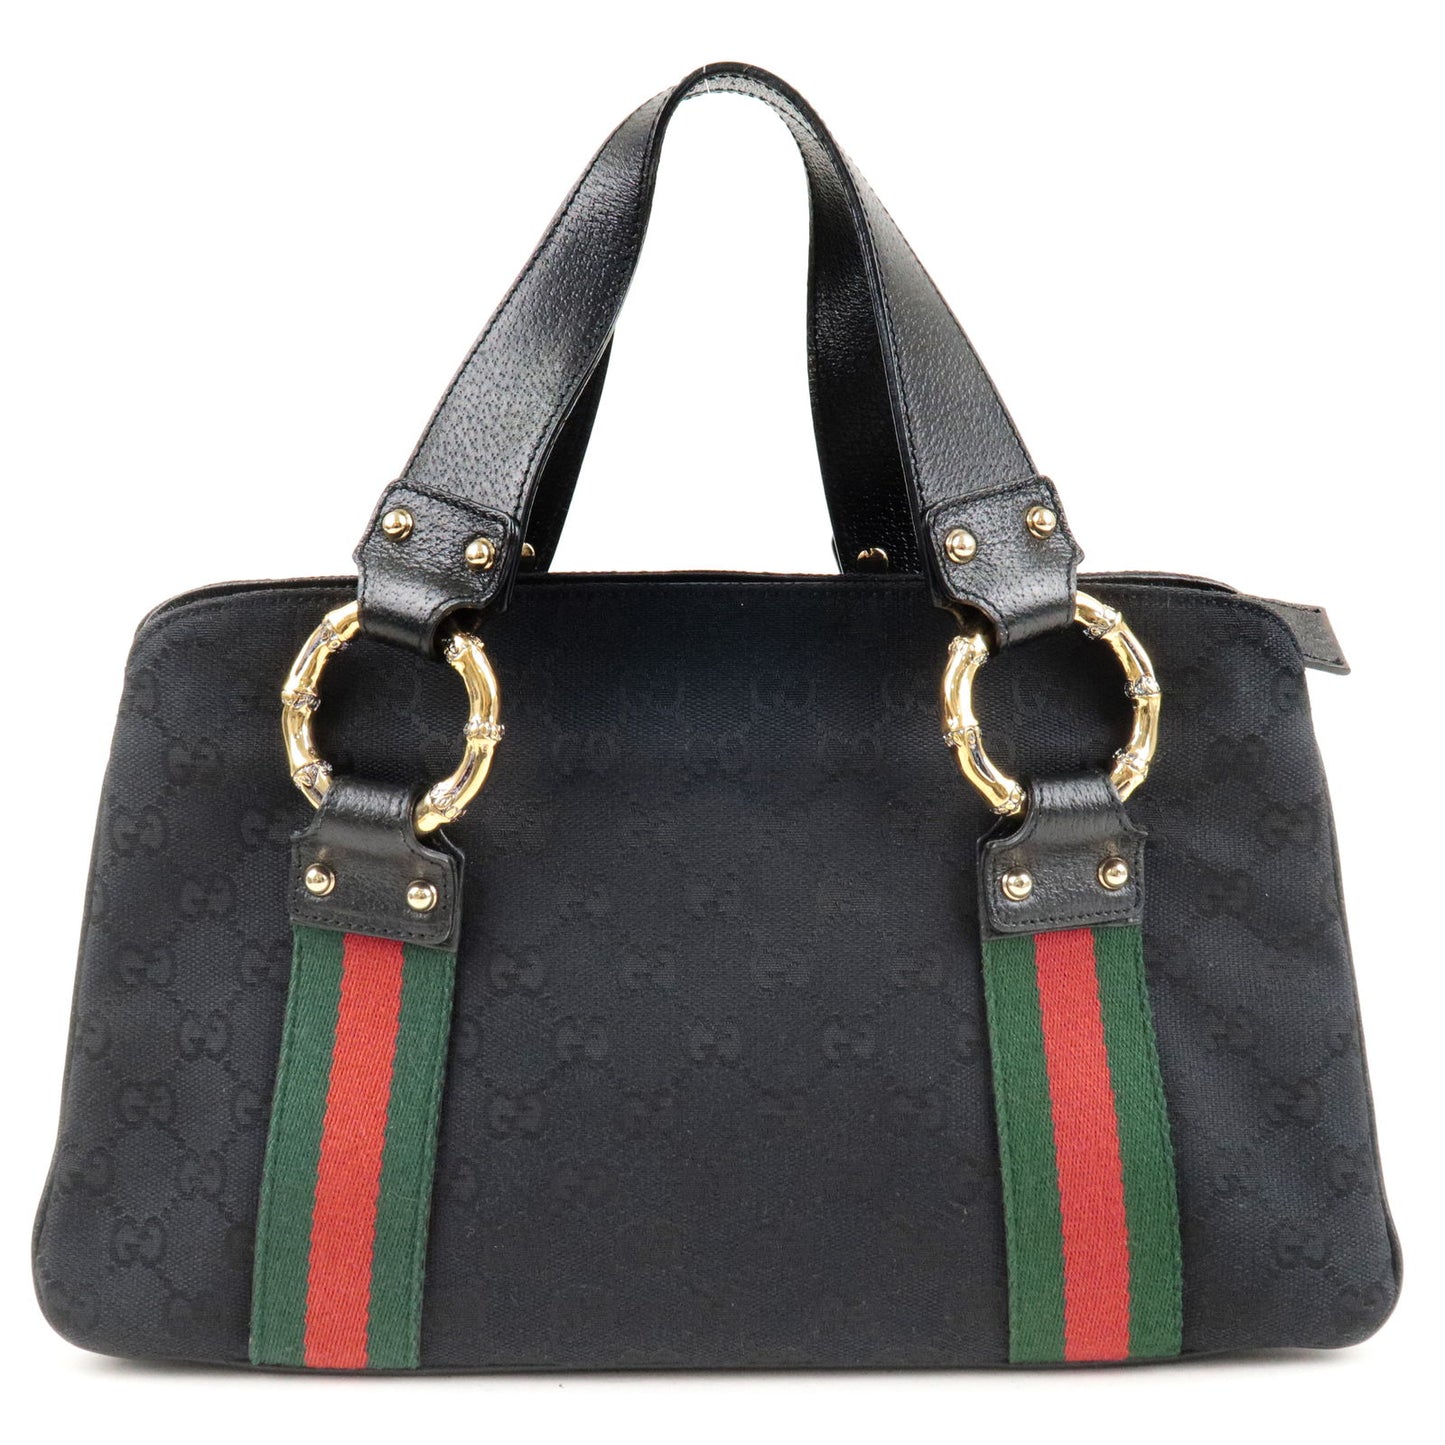 GUCCI-Sherry-Bamboo-GG-Canvas-Leather-Hand-Bag-Black-131324